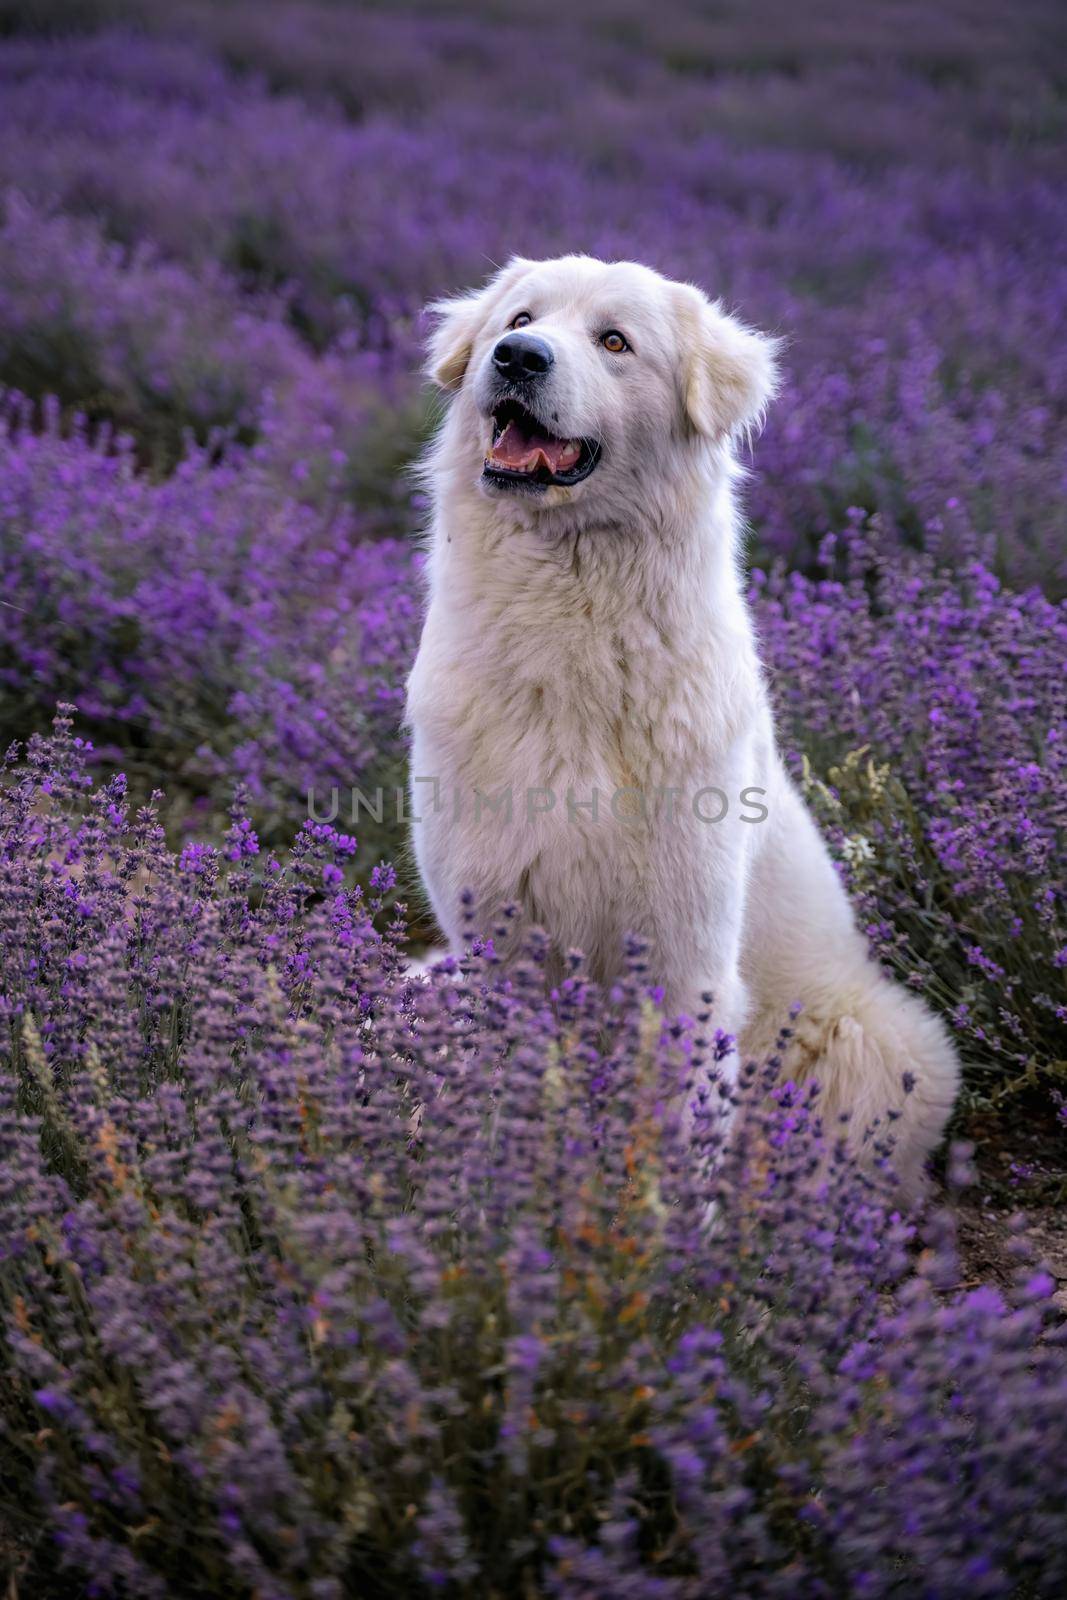 Large white dog in a lavender field in Provence, France by Matiunina